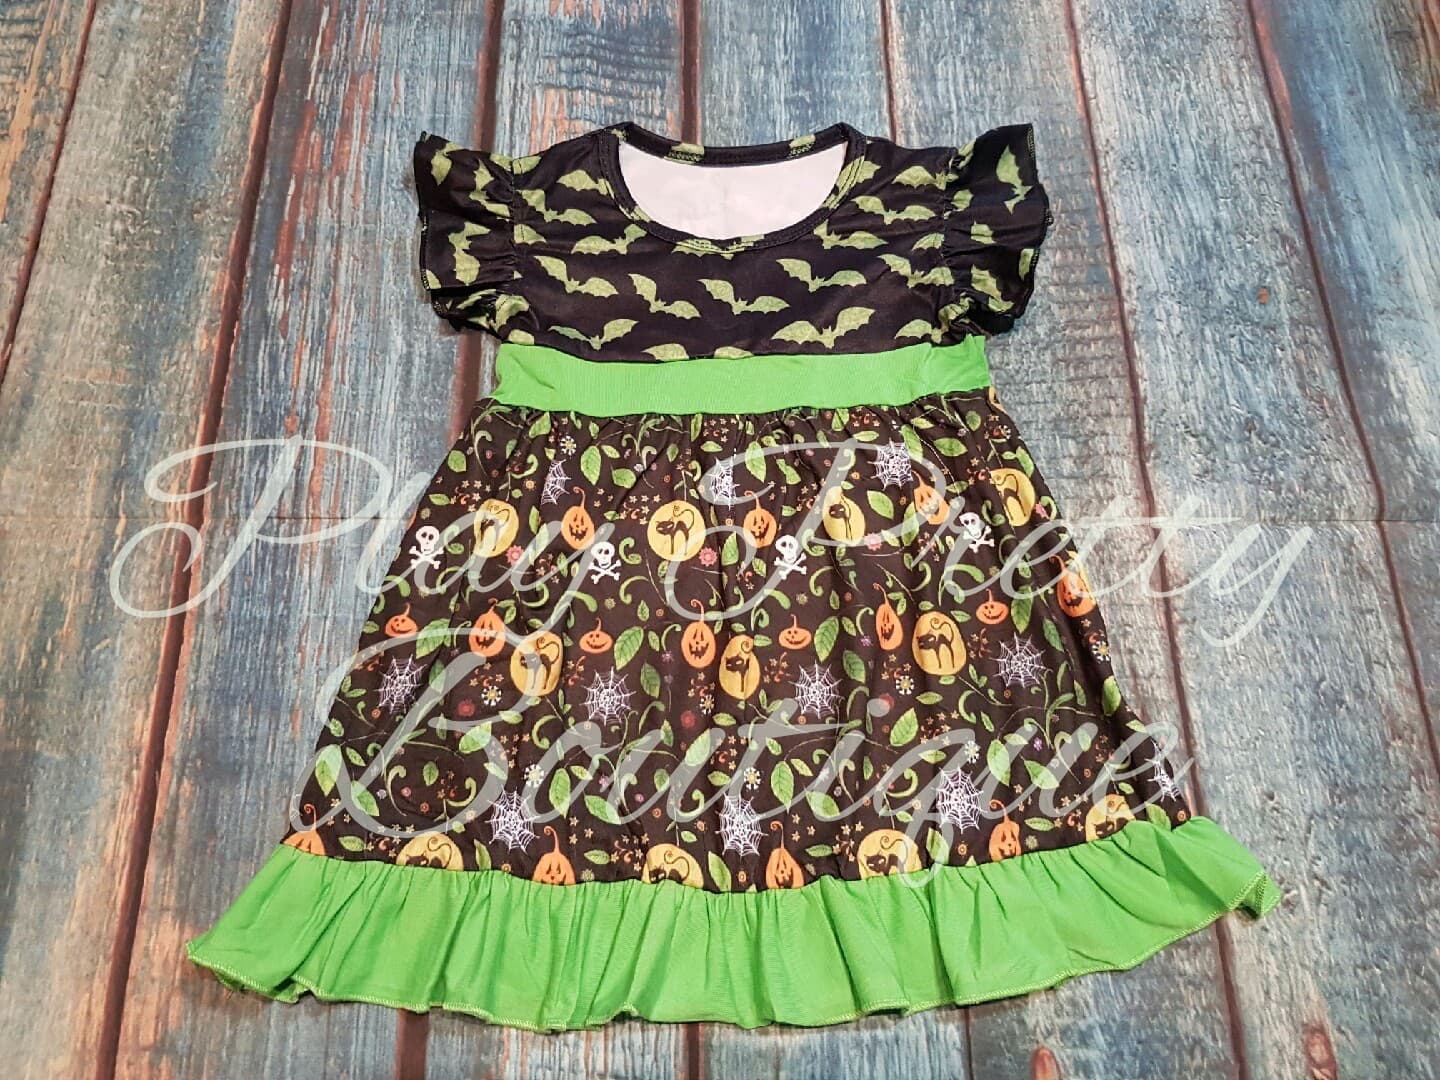 "Jeepers Creepers" Flutter Dress